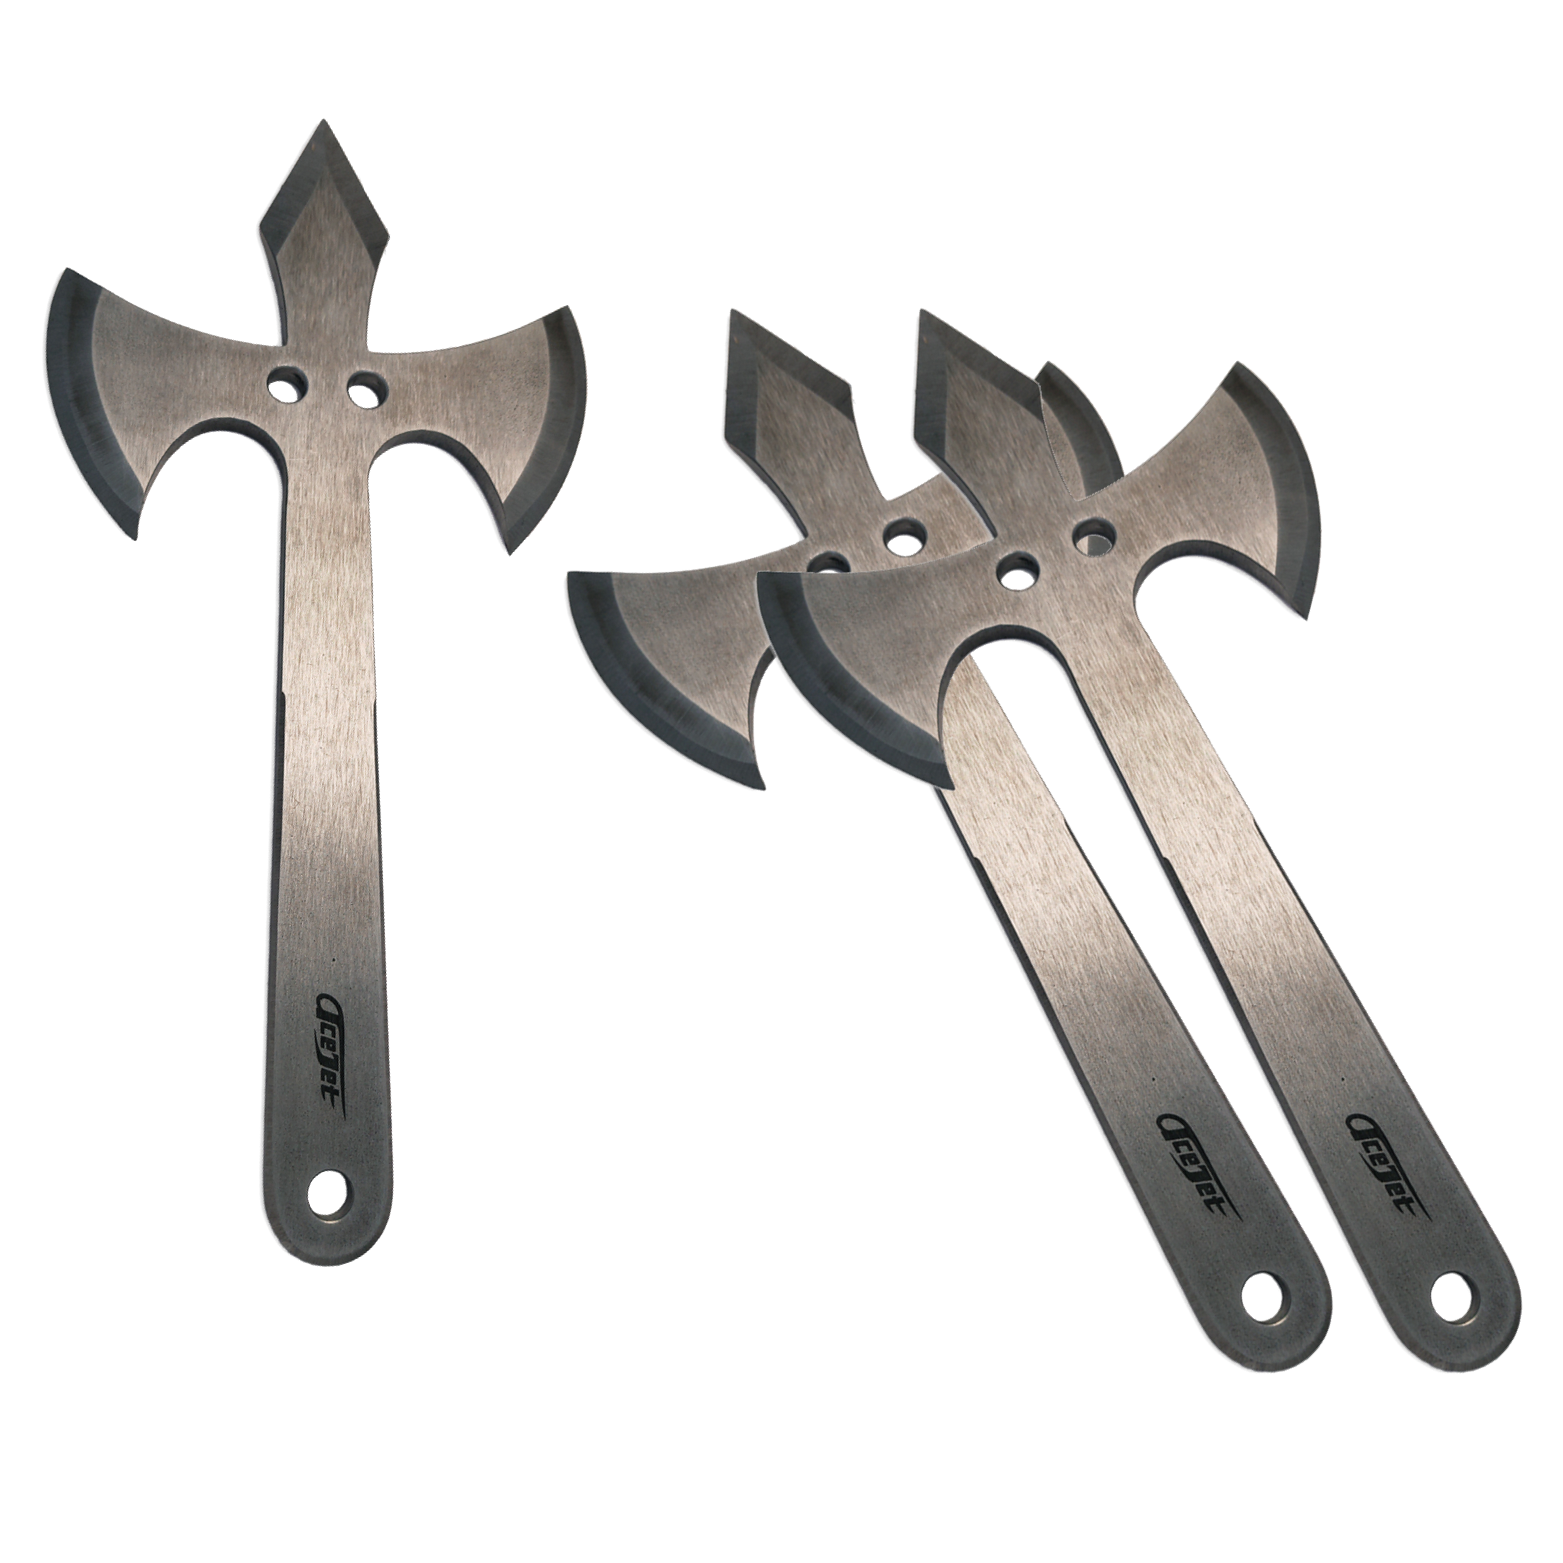 ACEJET AGILITY TRIDENT - Throwing axe - set of 3